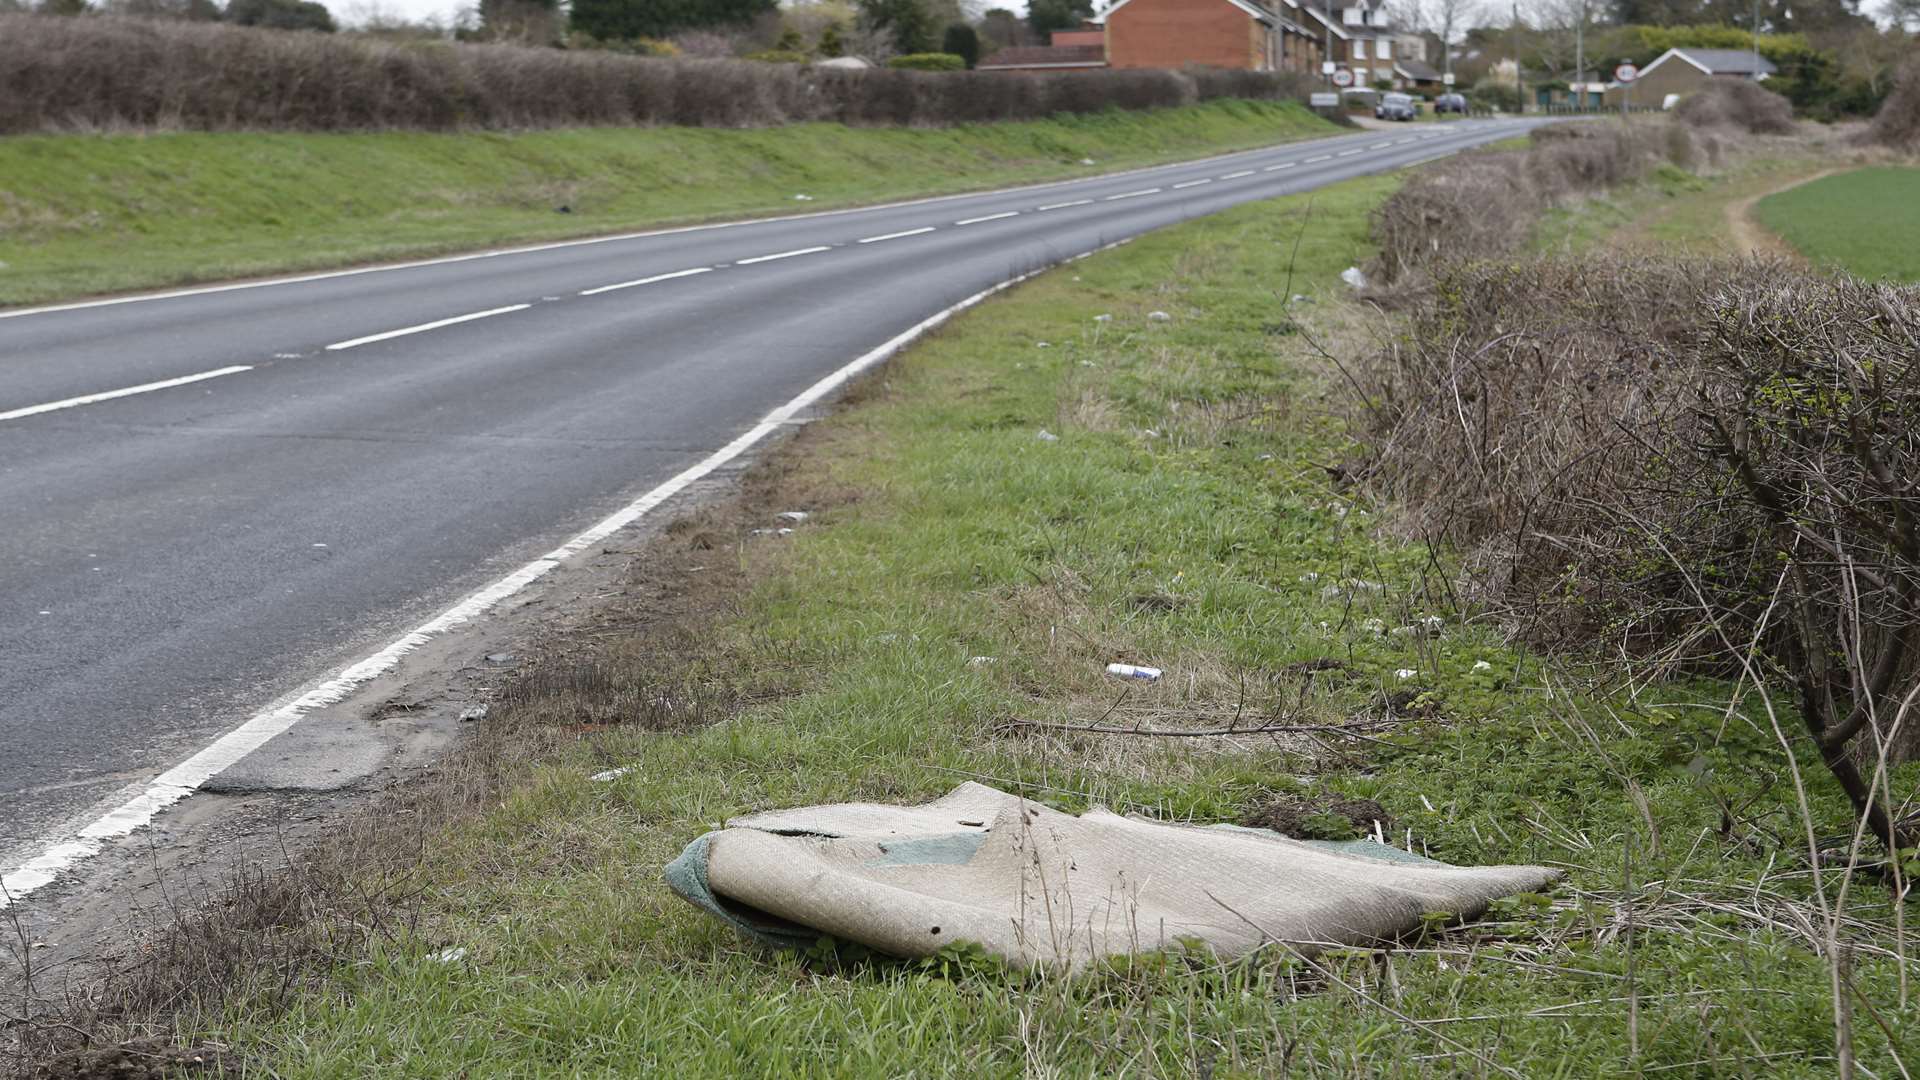 Rubbish on the A26 between Barming and Teston